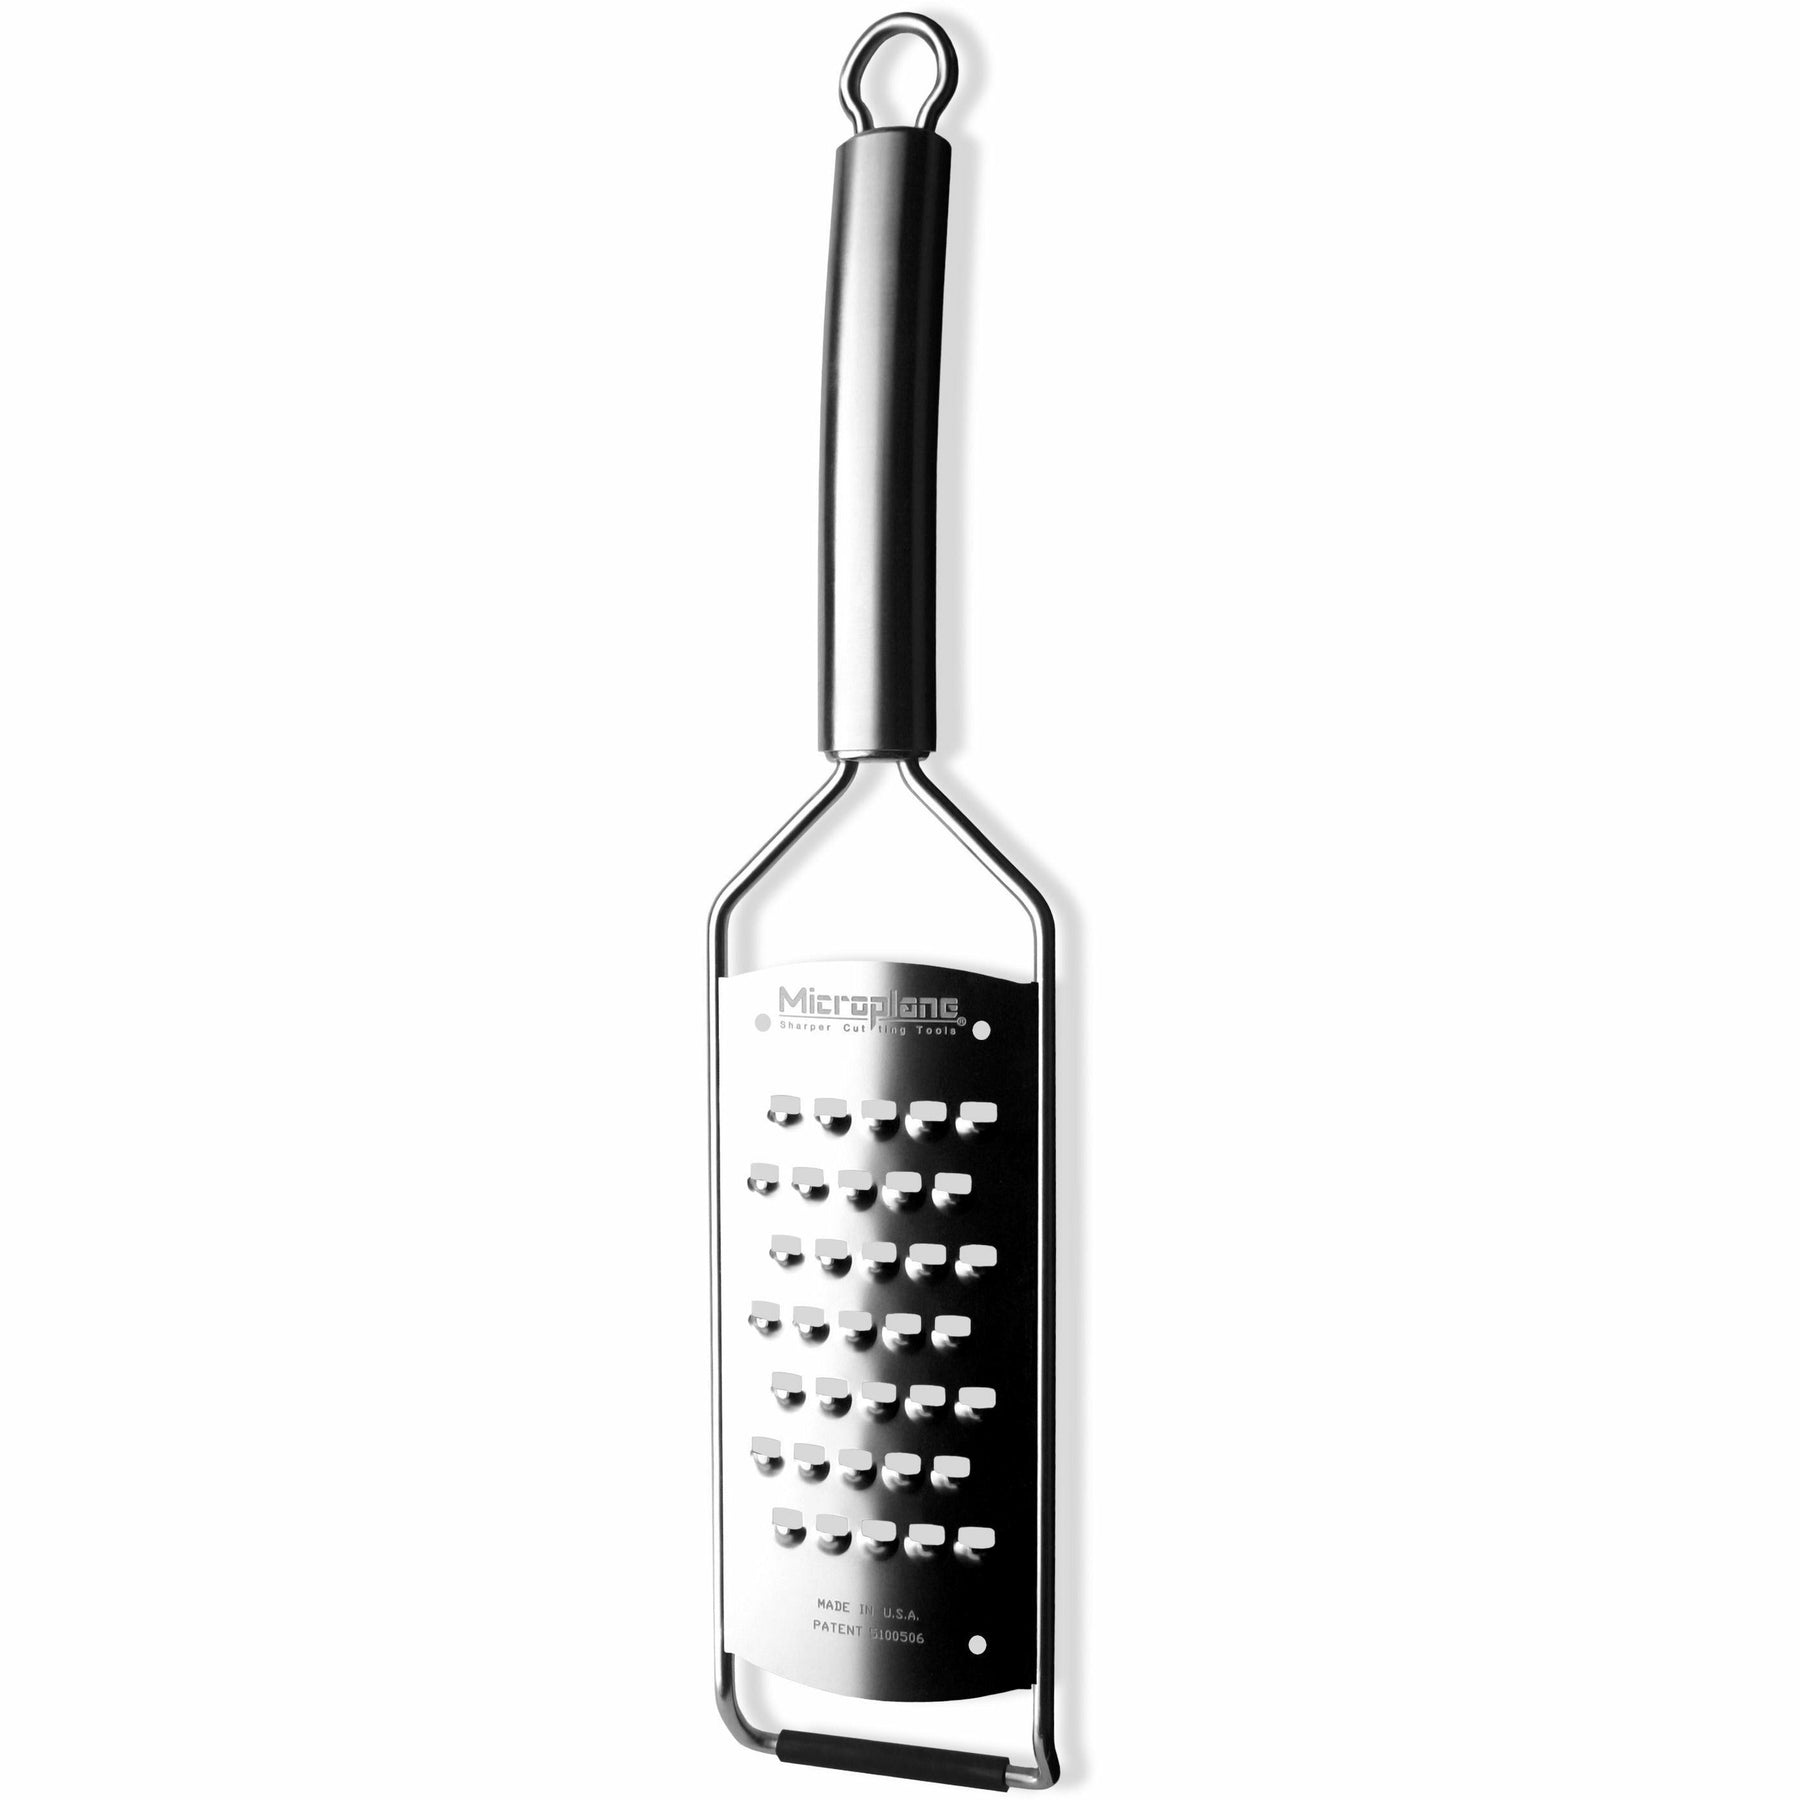 Fante's Cousin Nico's Suction Base Cheese Grater - Fante's Kitchen